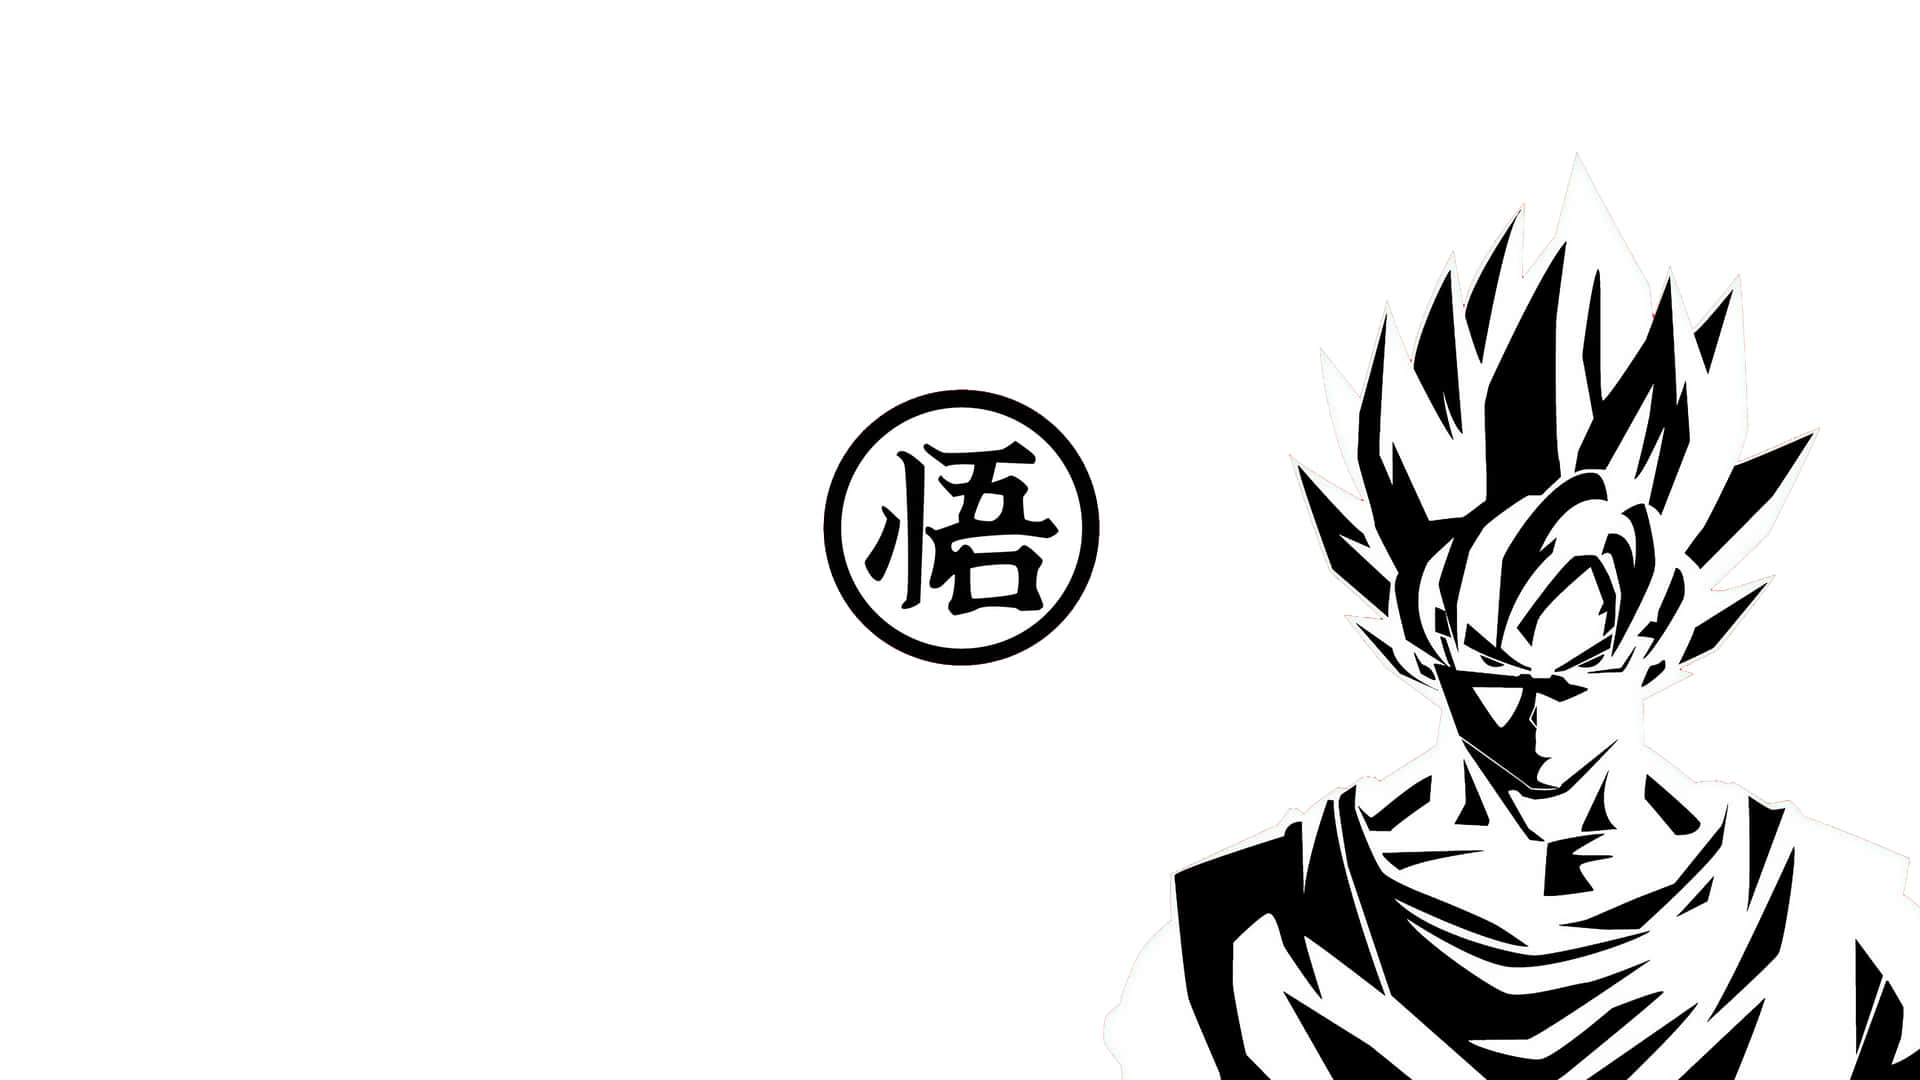 Intense power radiates from the Super Saiyan God in this Black and White Dragon Ball illustration Wallpaper